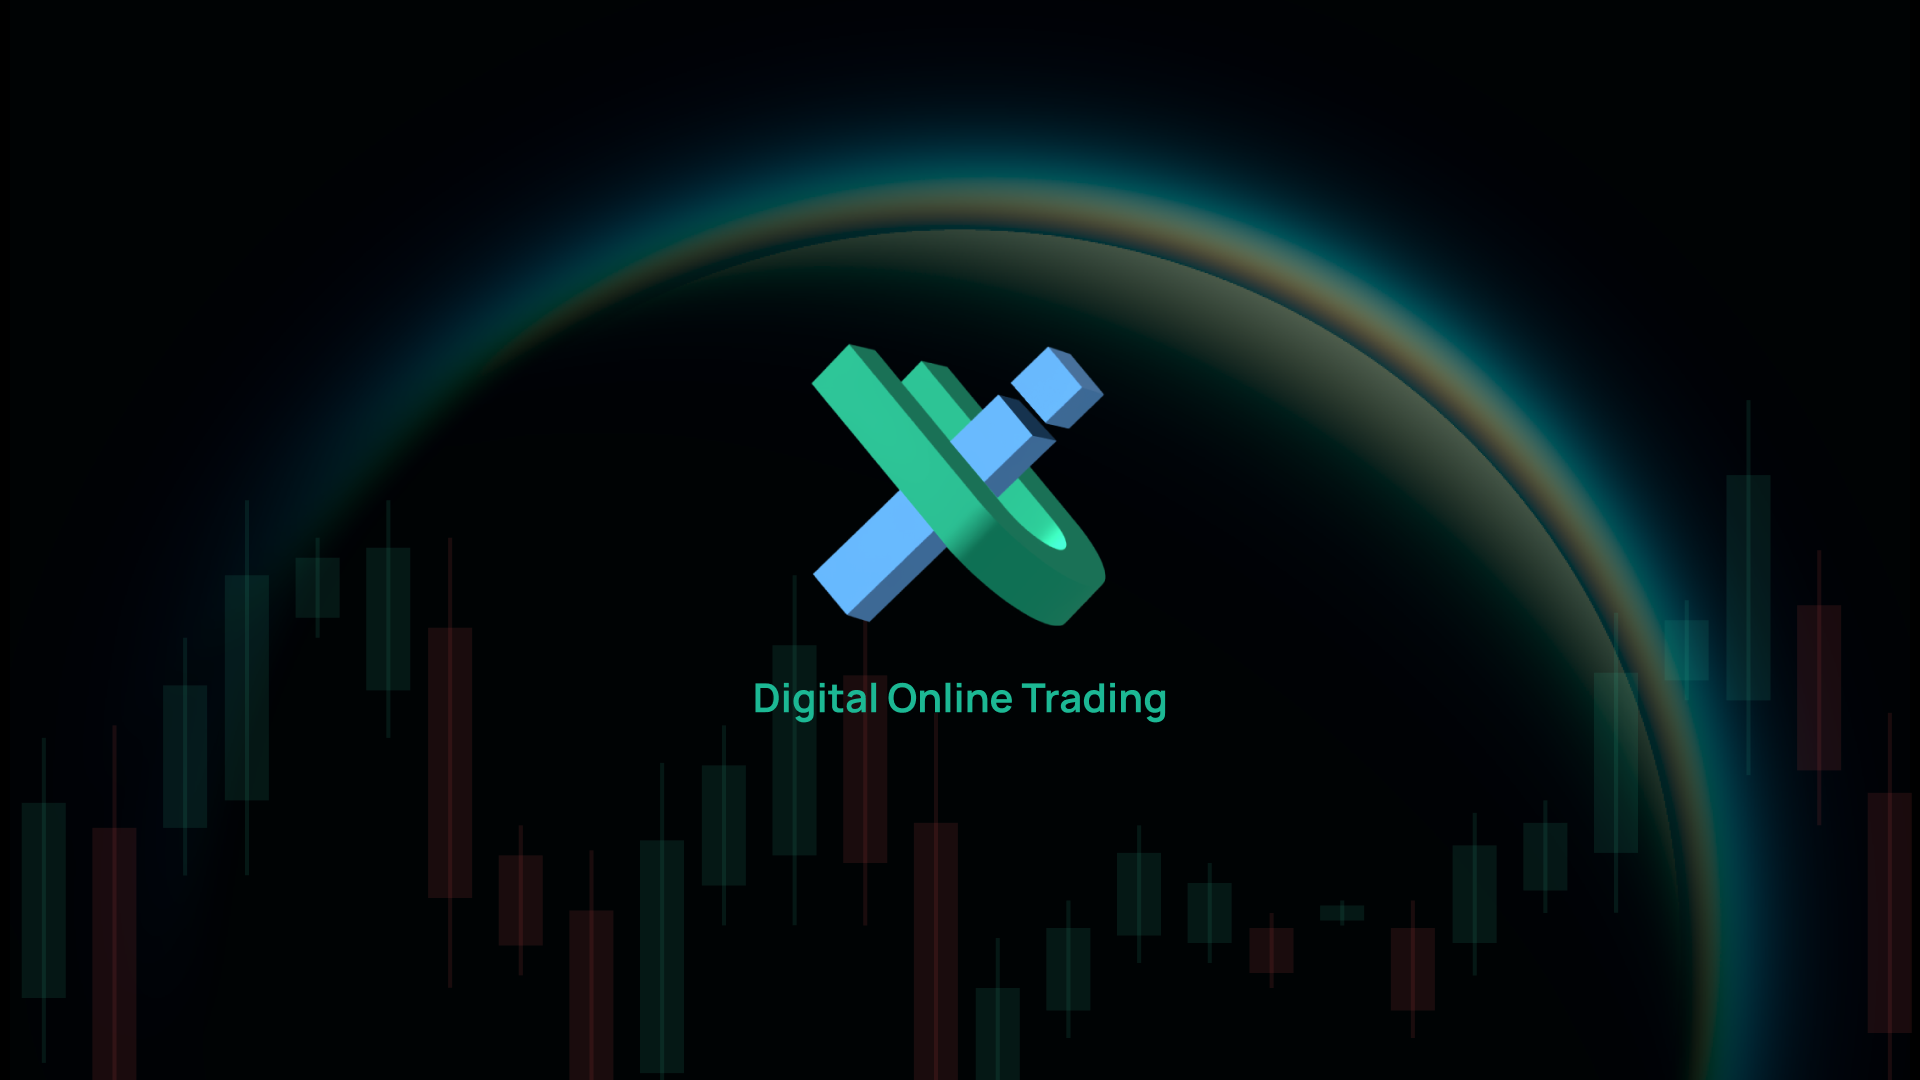 Ready go to ... https://bit.ly/IUXmarketsXrhea [ IUX | Your Trusted Online Trading Platform]